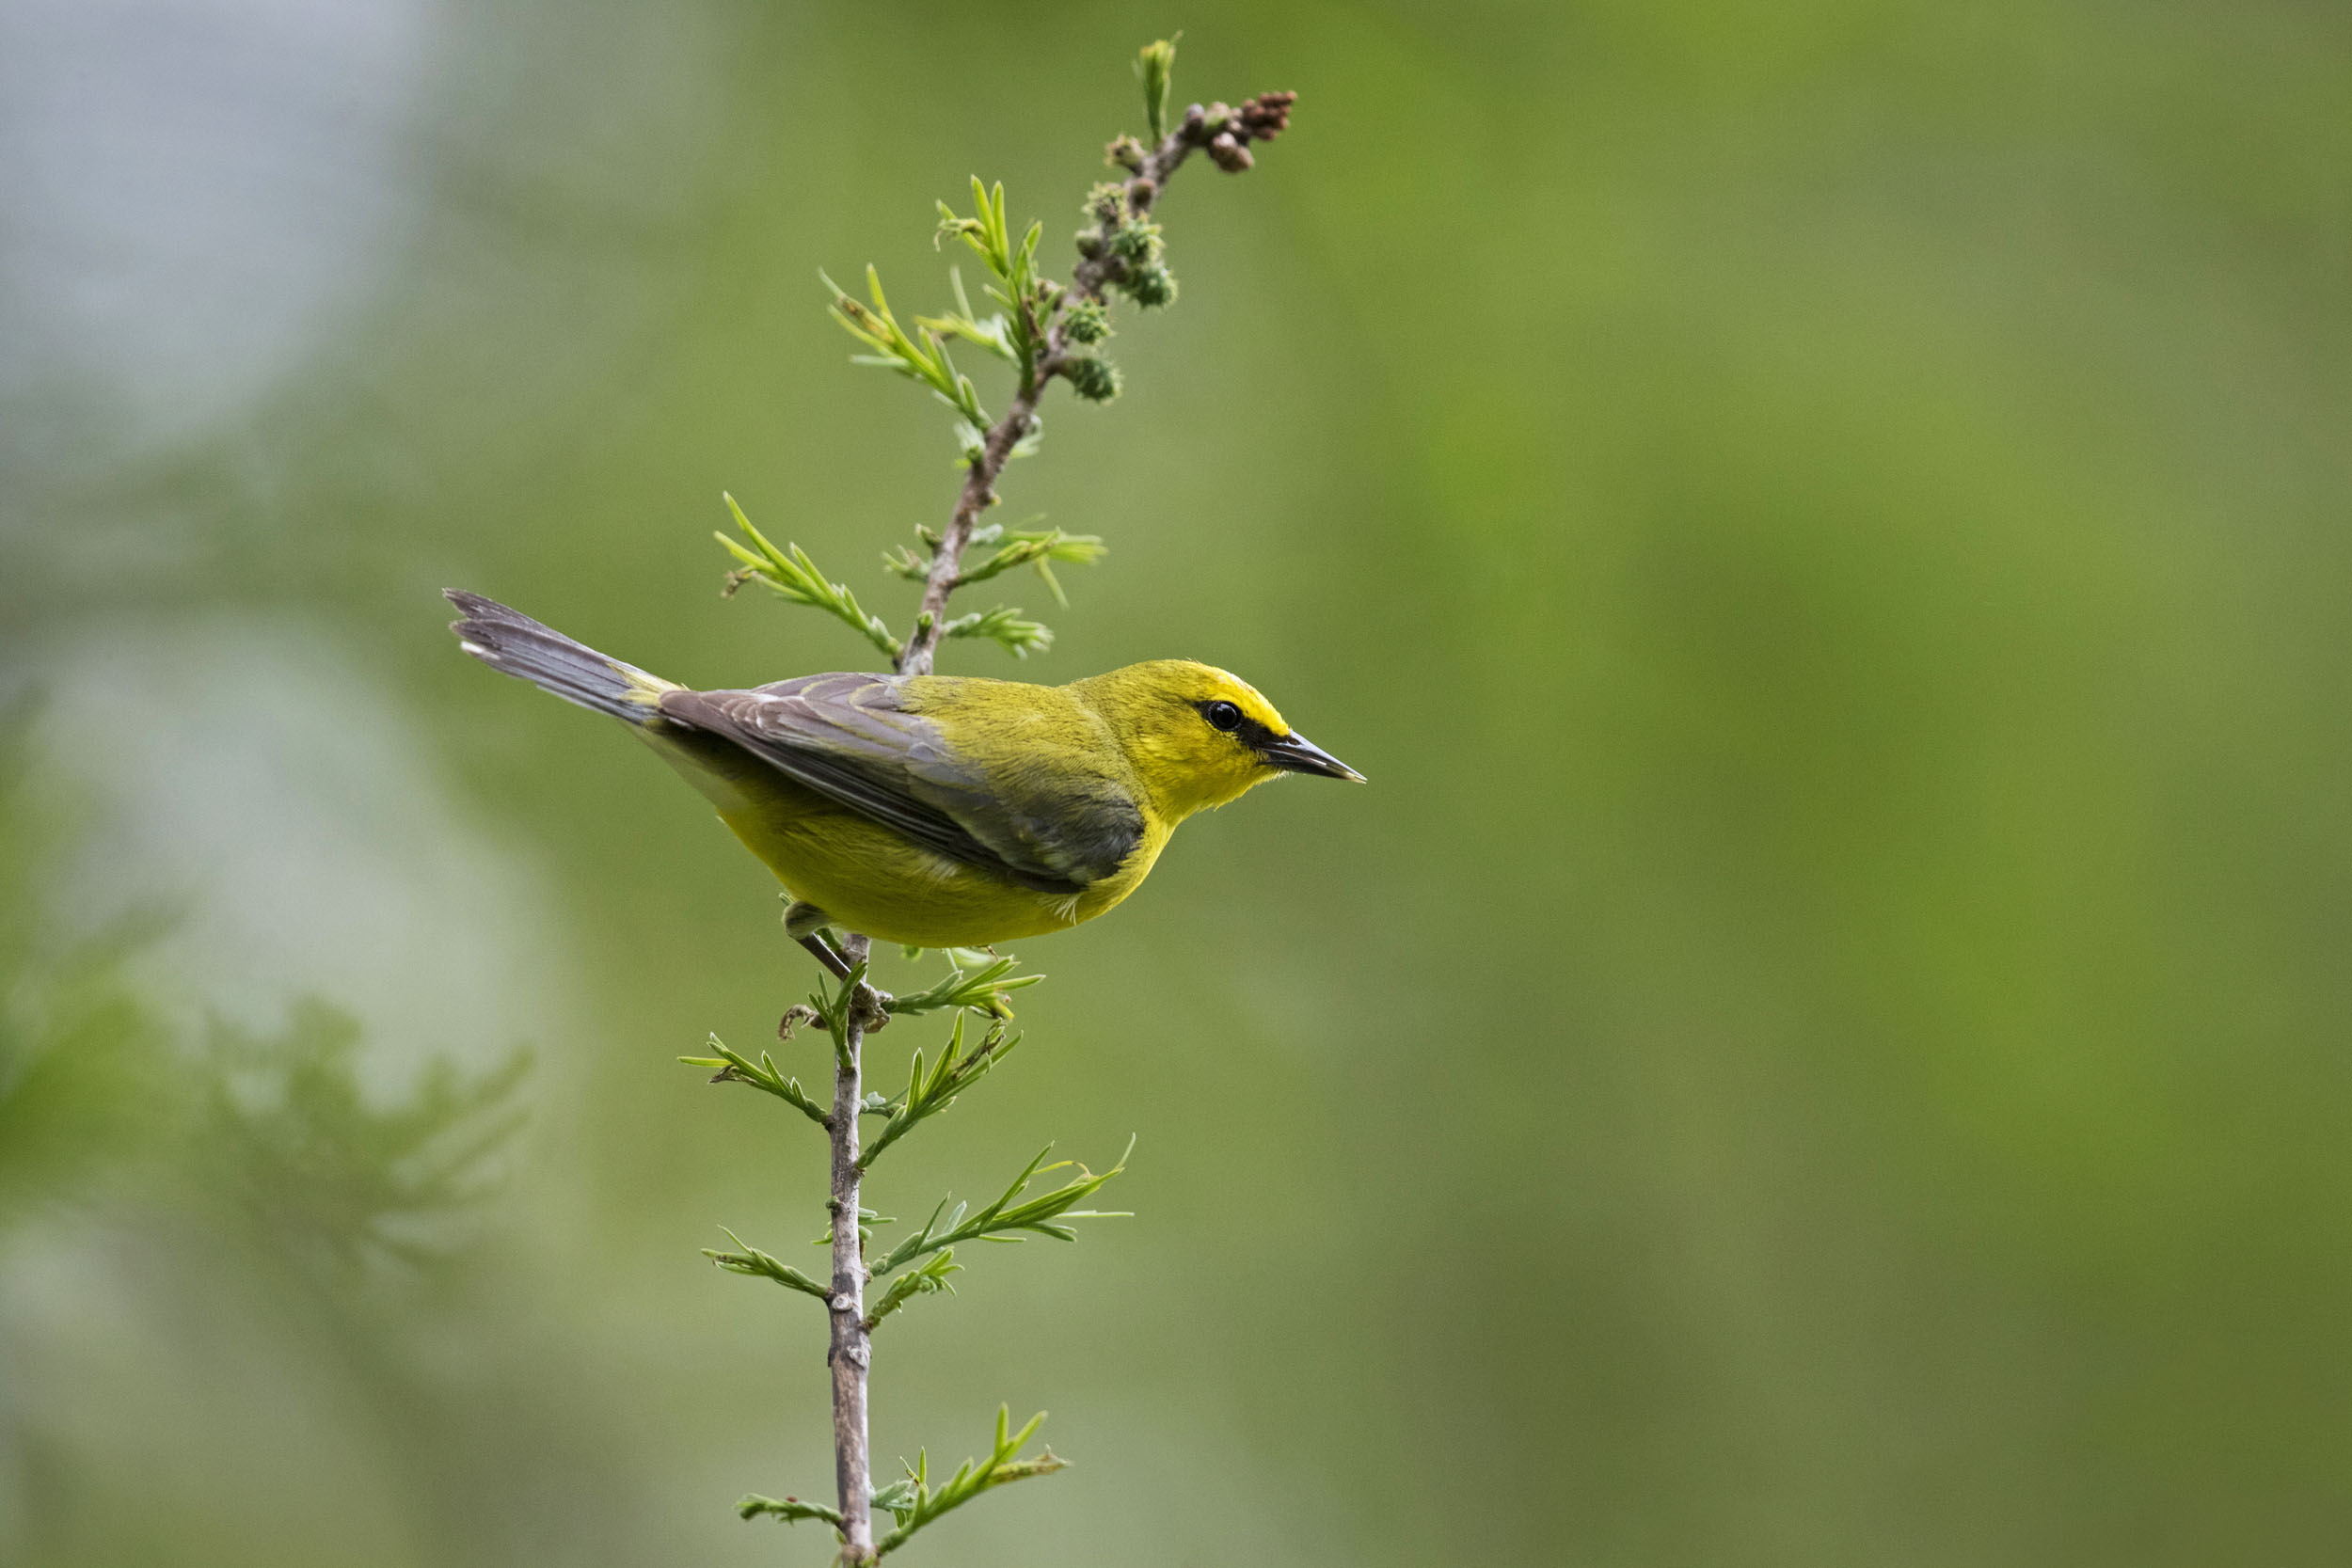 Almost all eastern warbler species have been documented in Riverside Park, including frequent visitors during migration such as the Blue-winged Warbler. Photo: François Portmann